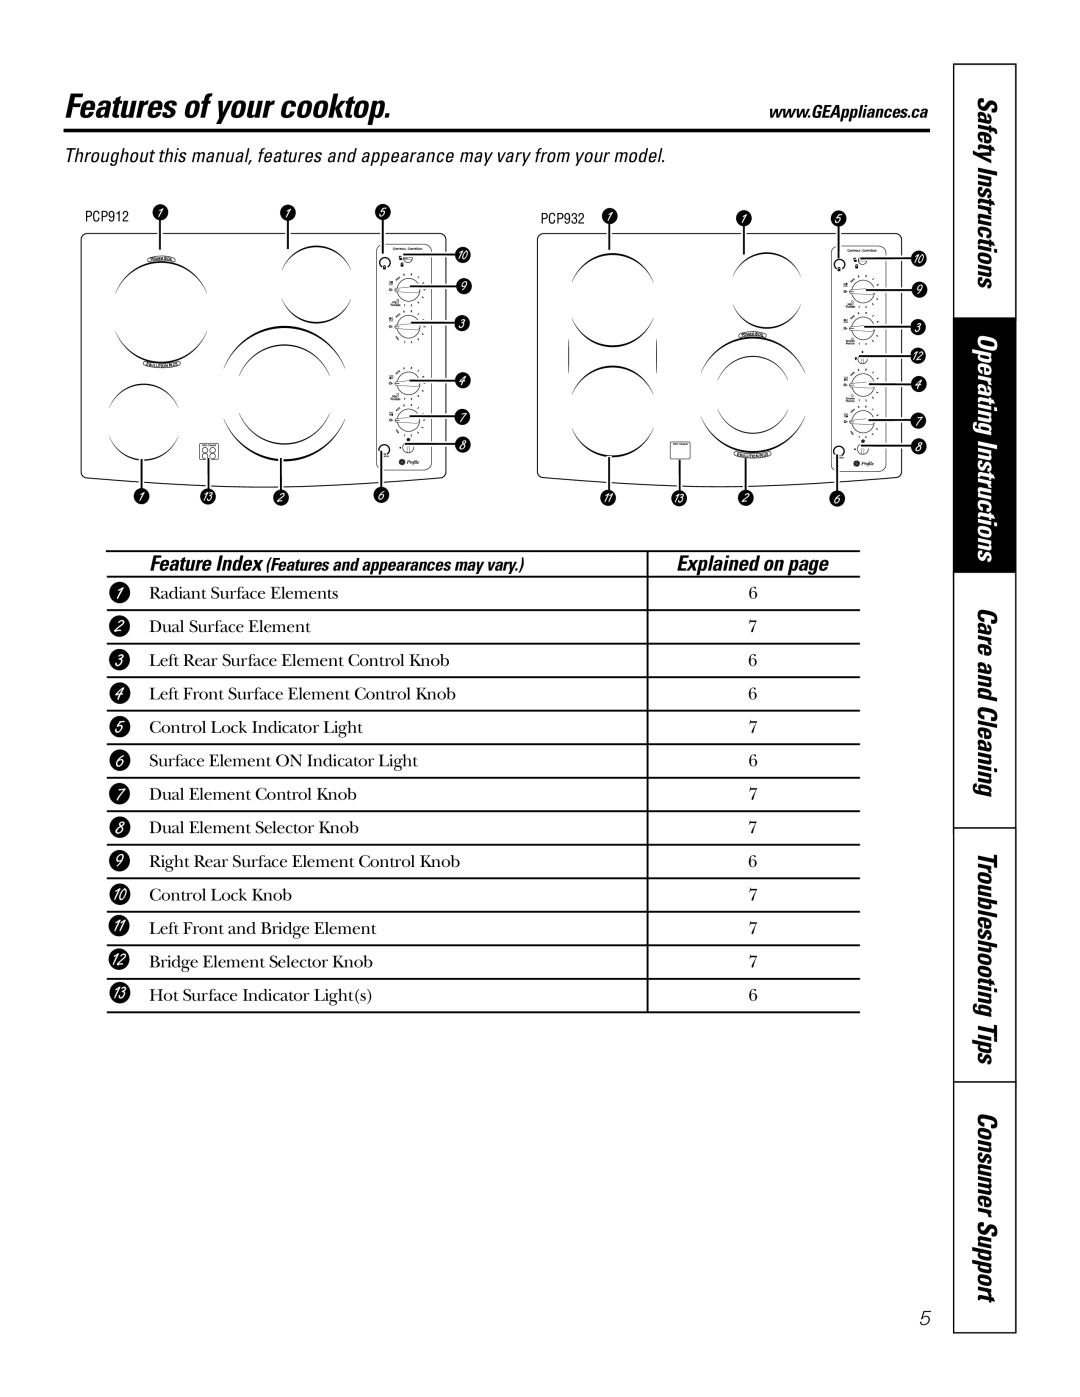 GE Monogram PCP932, PCP912 owner manual Features of your cooktop, Explained on page 